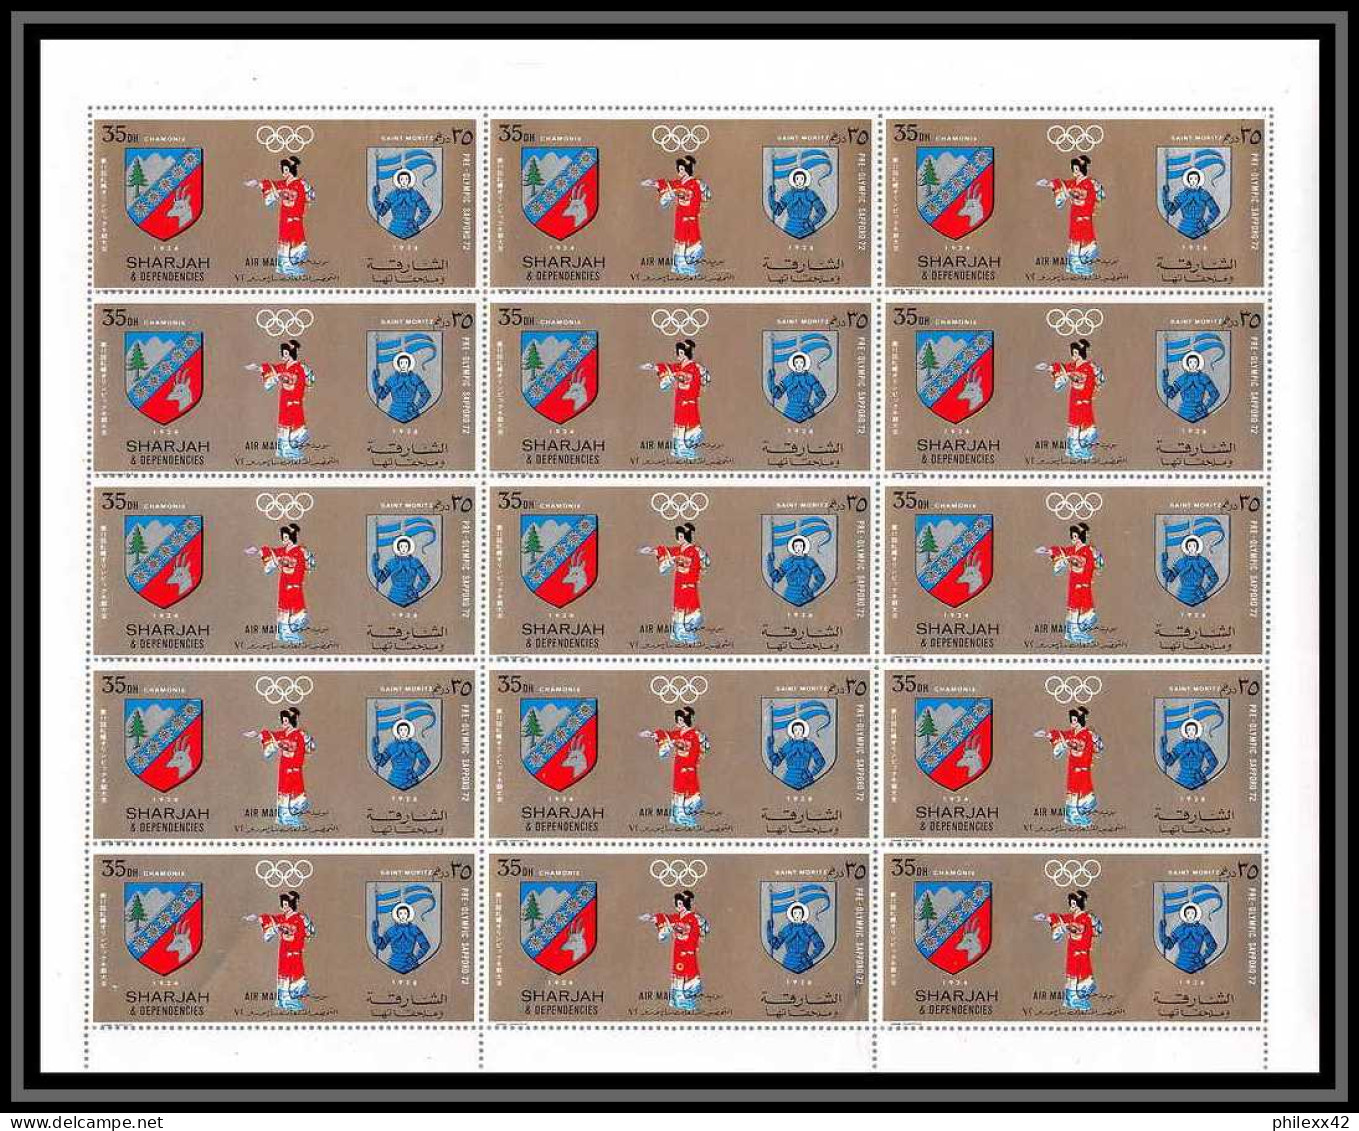 101c Sharjah MNH ** Mi N° 825 / 834 A jeux olympiques (winter olympic games) Sapporo 72 feuilles (sheets)